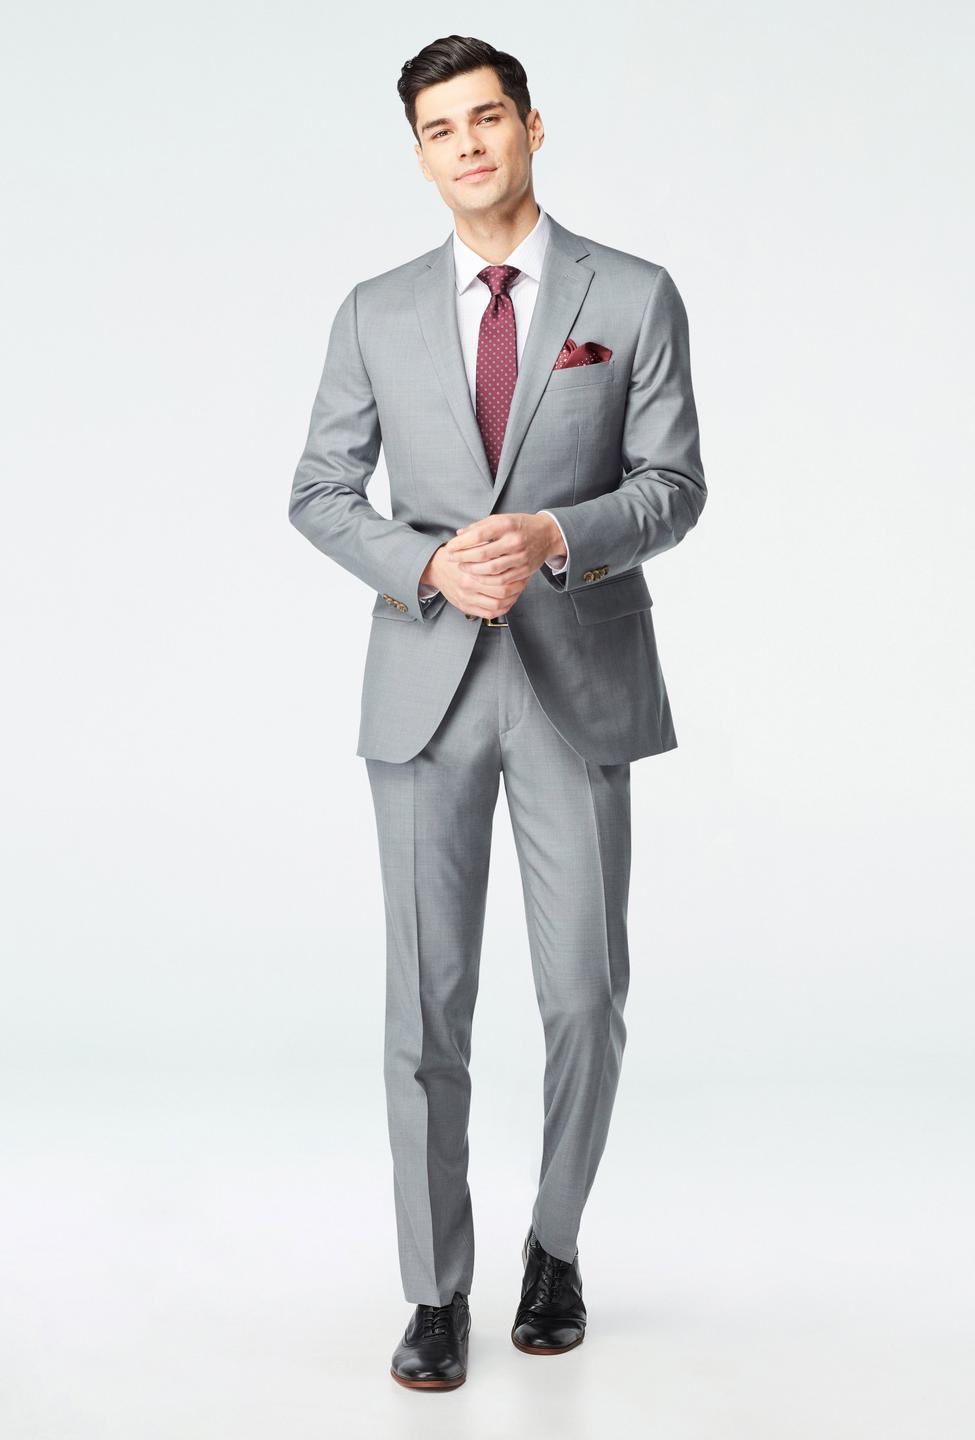 Gray suit - Highbridge Solid Design from Luxury Indochino Collection